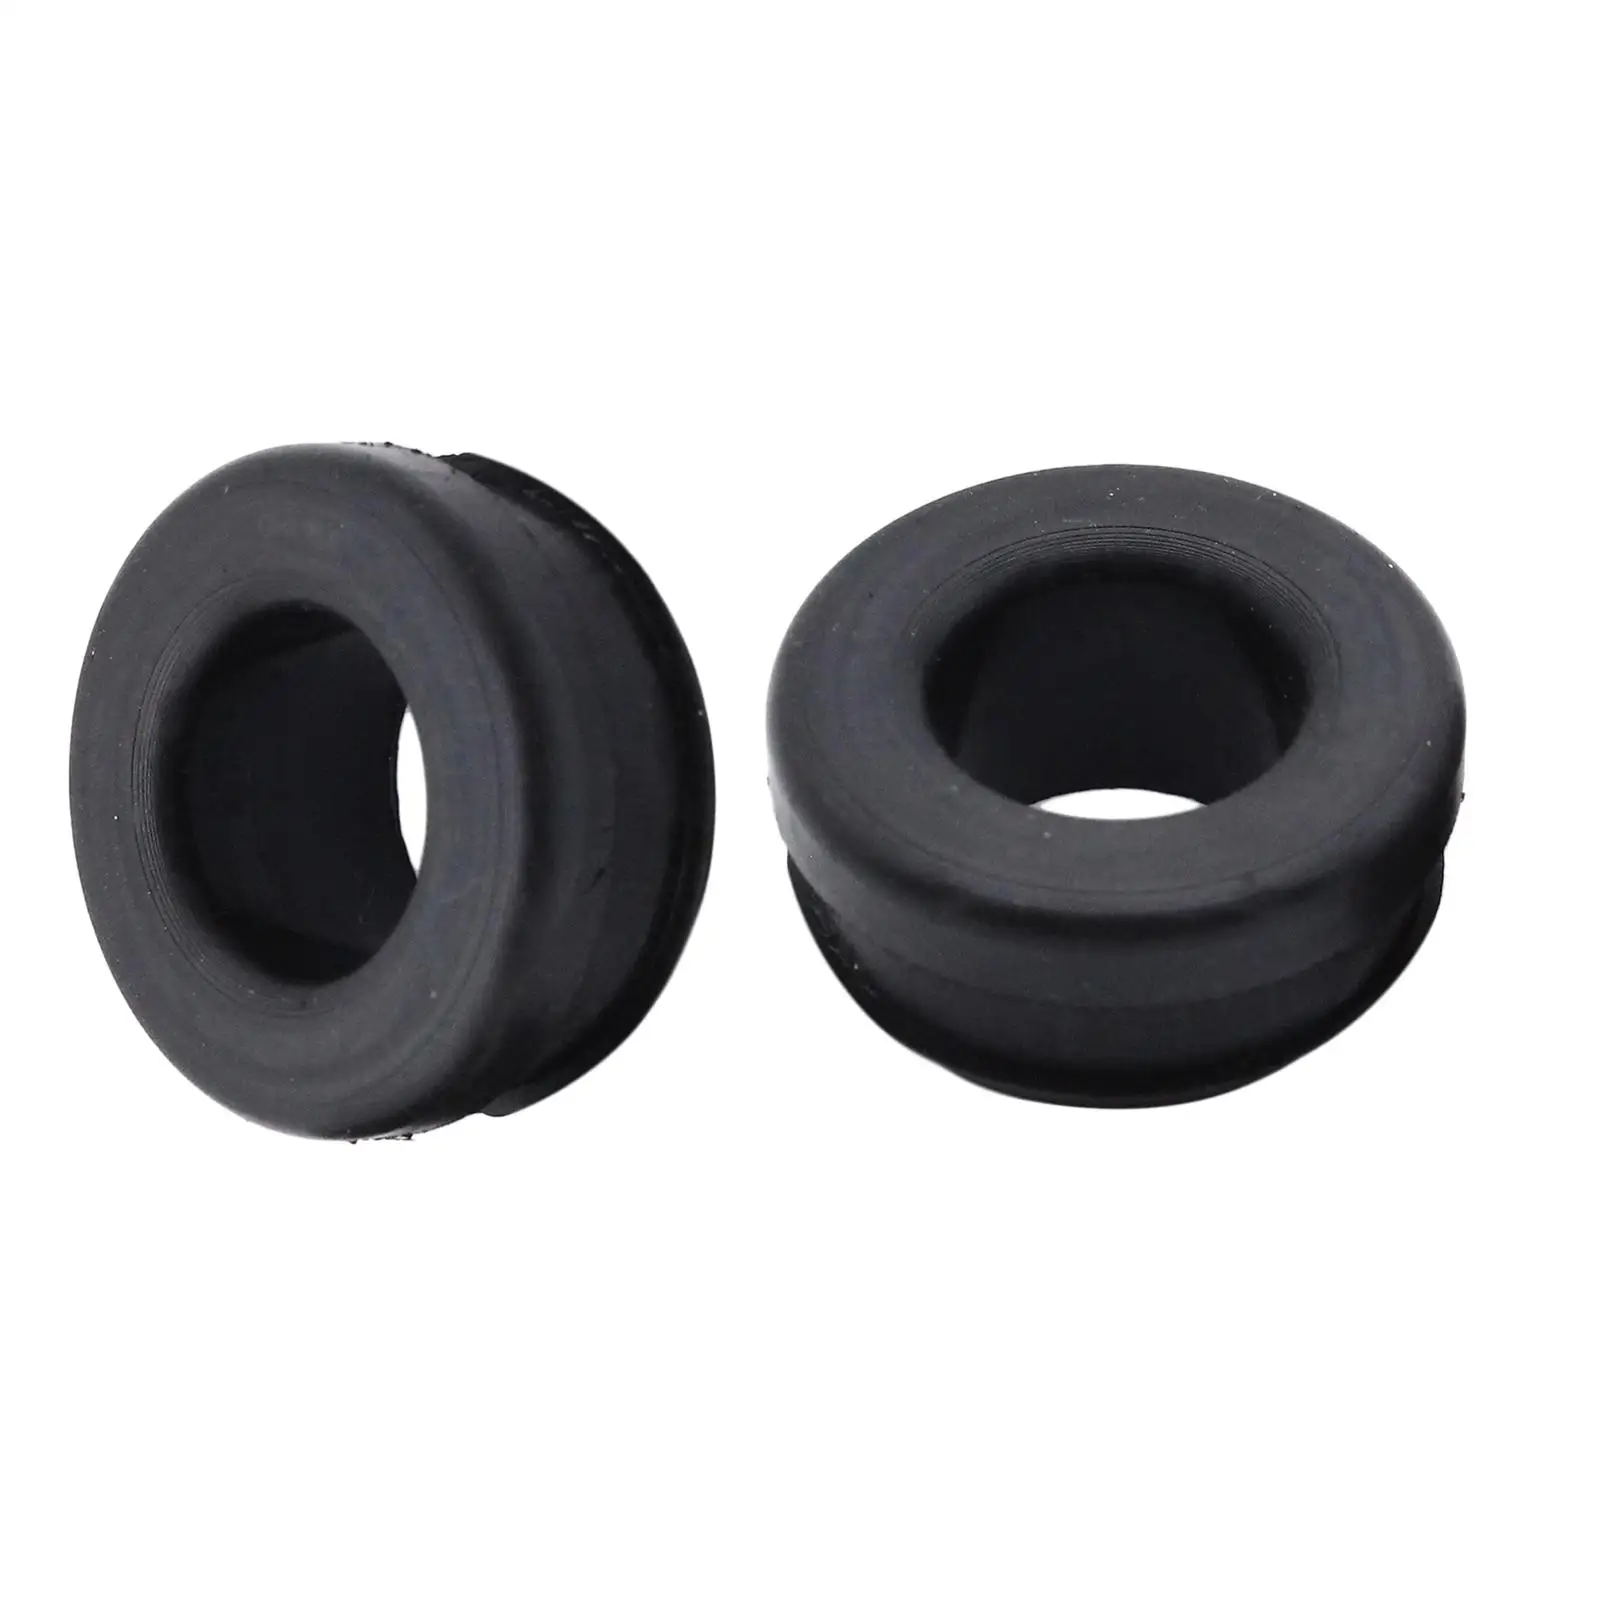 2 Pieces Rubber Pcv Breather Grommets O.D. 1 1/4